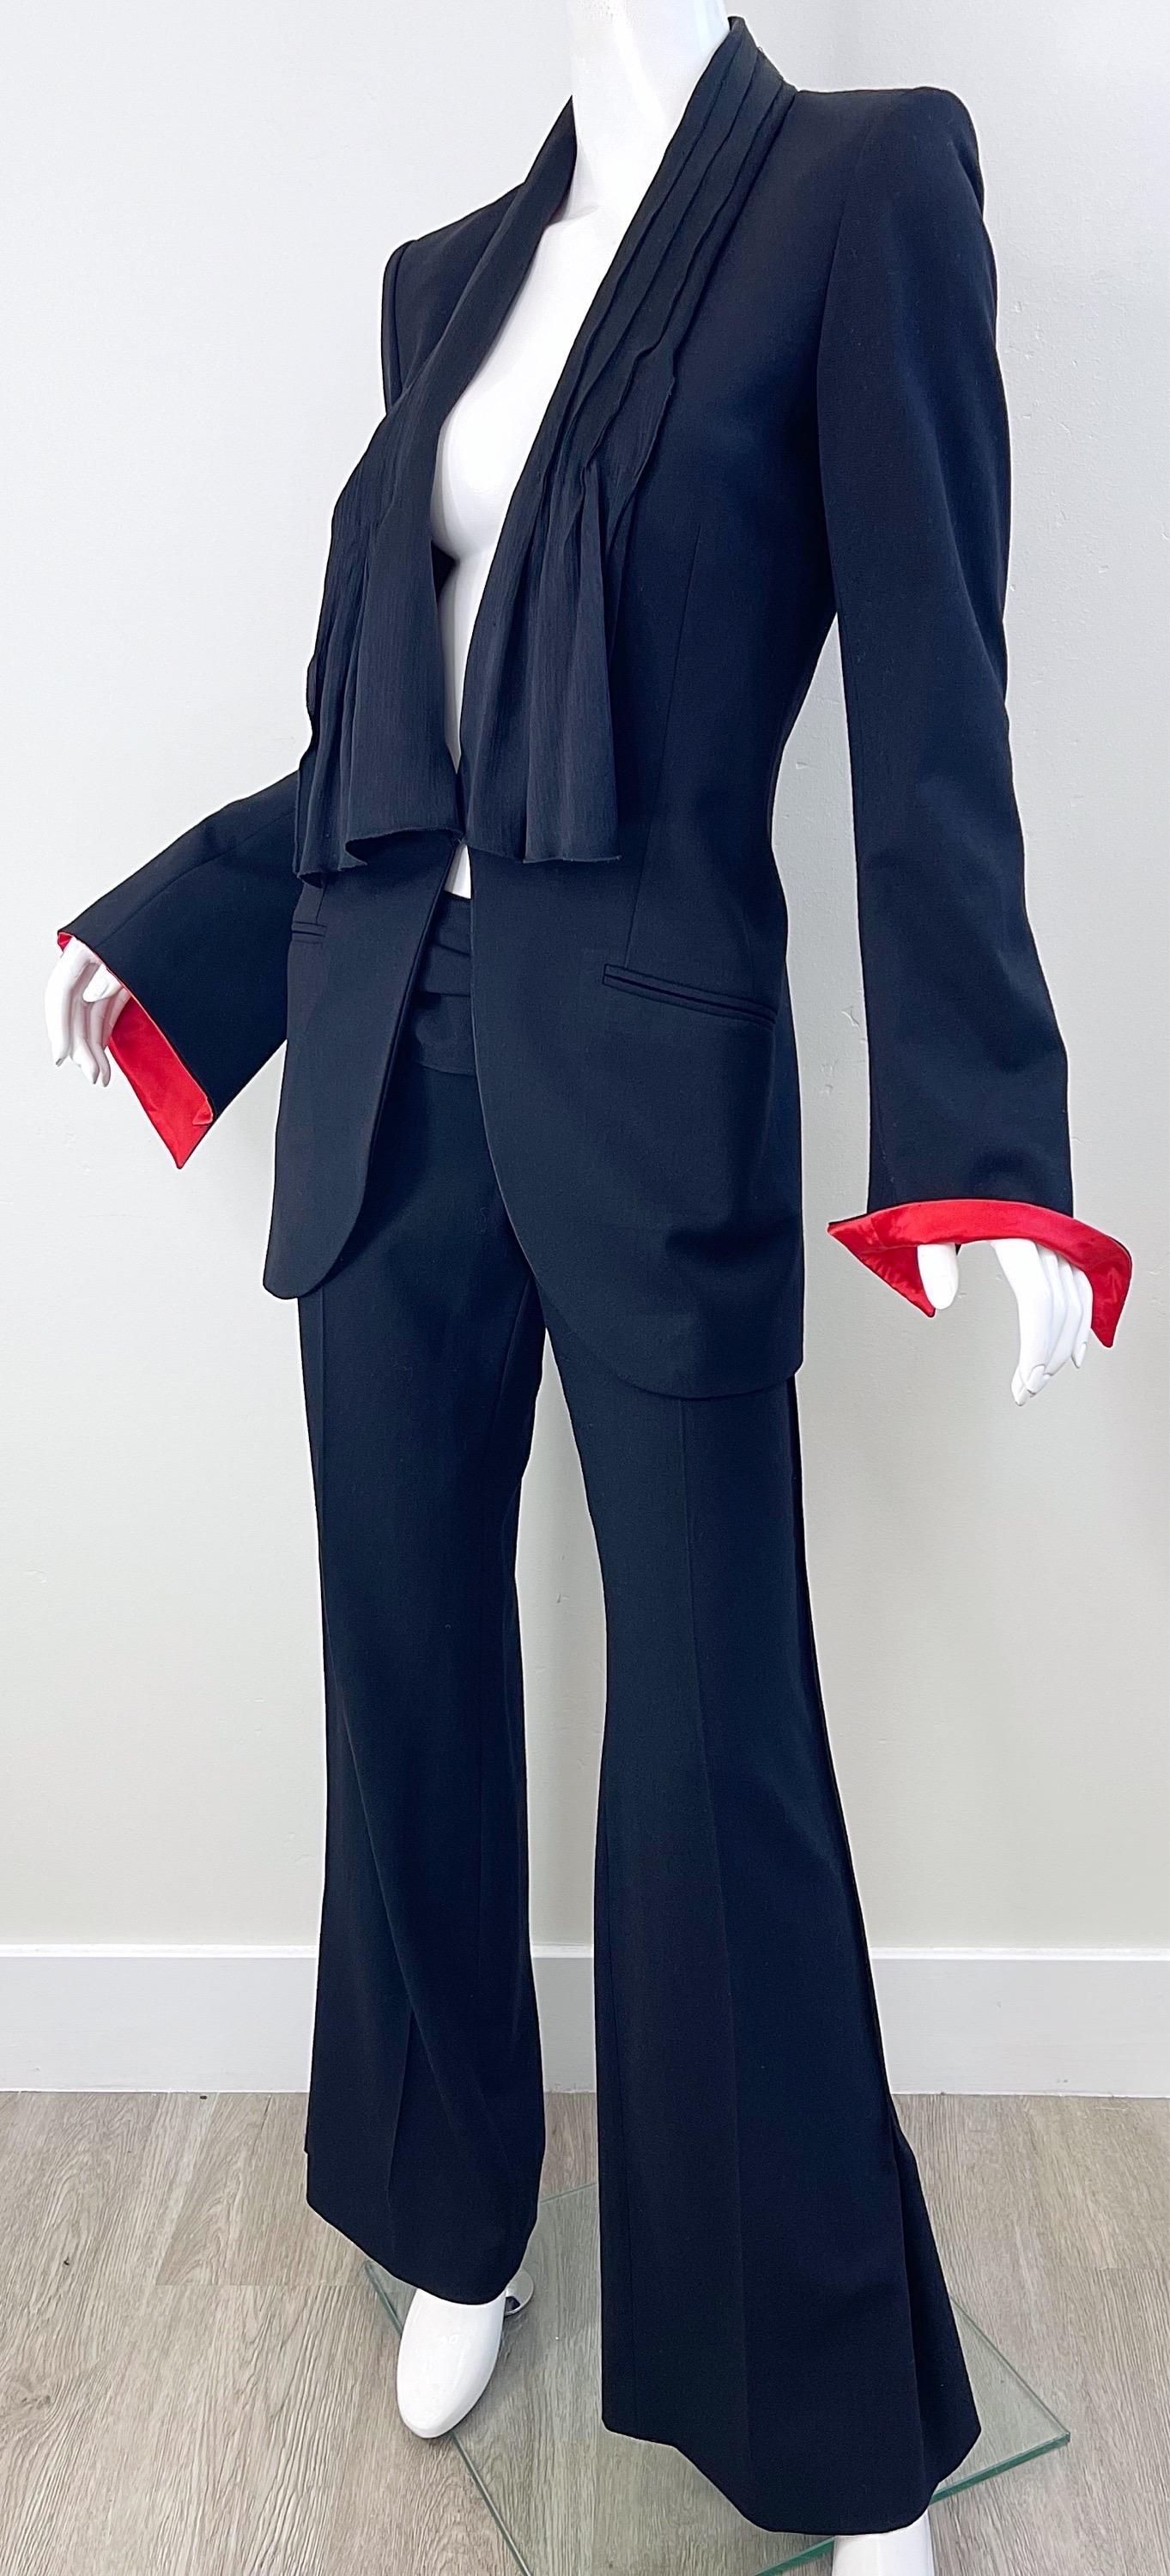 Lloyd Klein 2000s Black and Red Size 8 / 40 Wide Flare Leg Y2K Jacket Pant Suit  For Sale 5